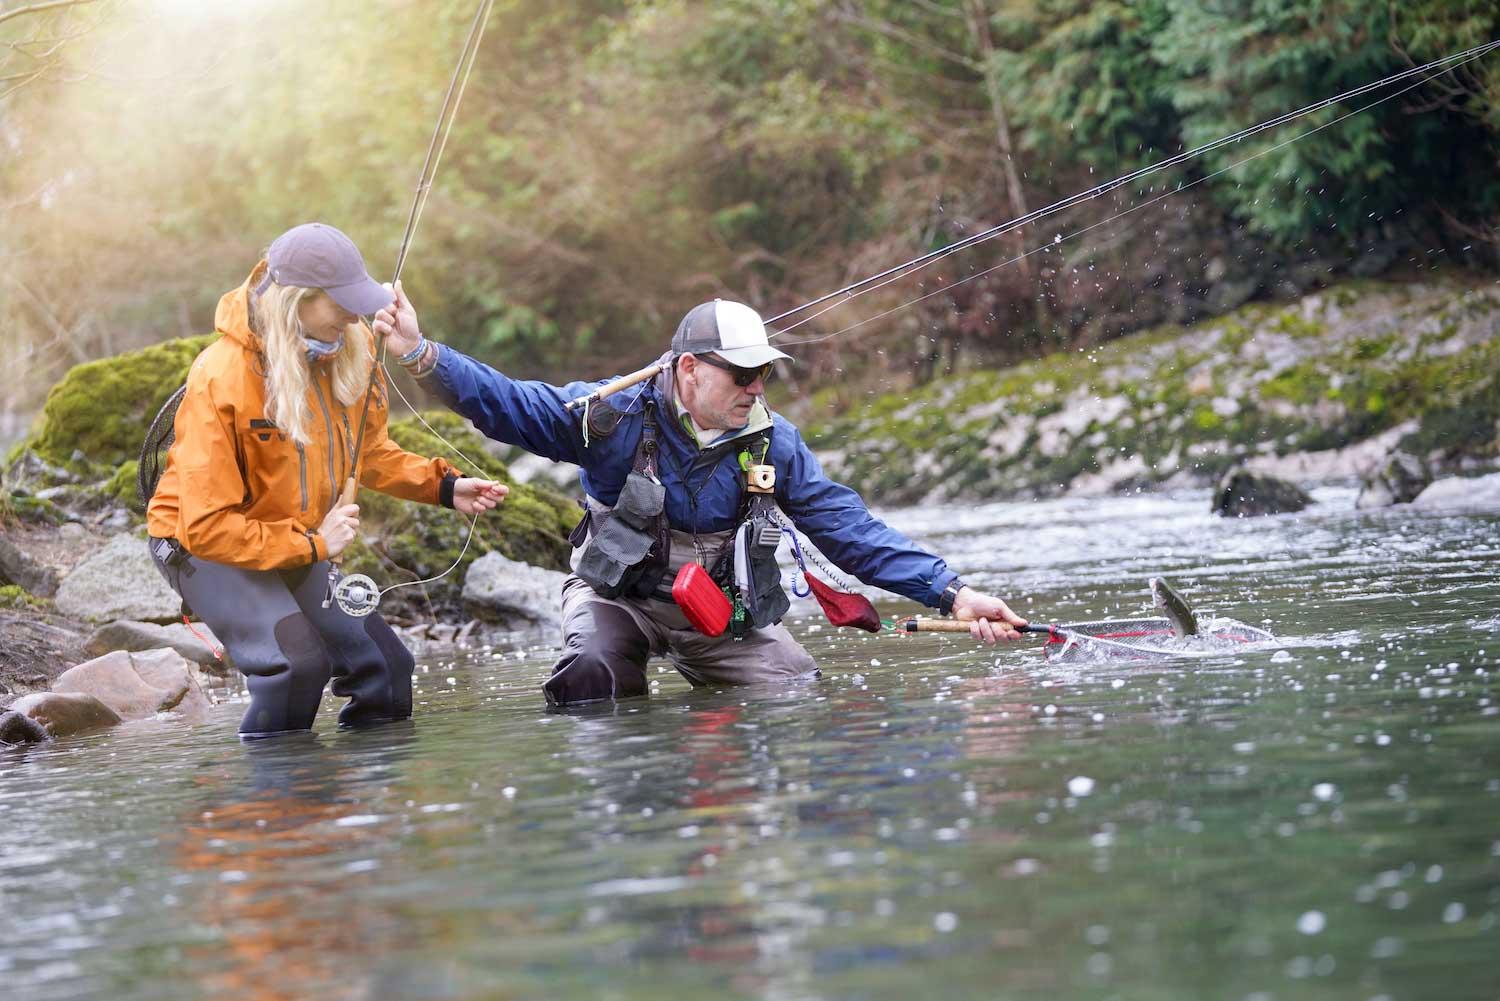 Two people wearing waders in the water while fly fishing, with one scooping up a fish in a net.